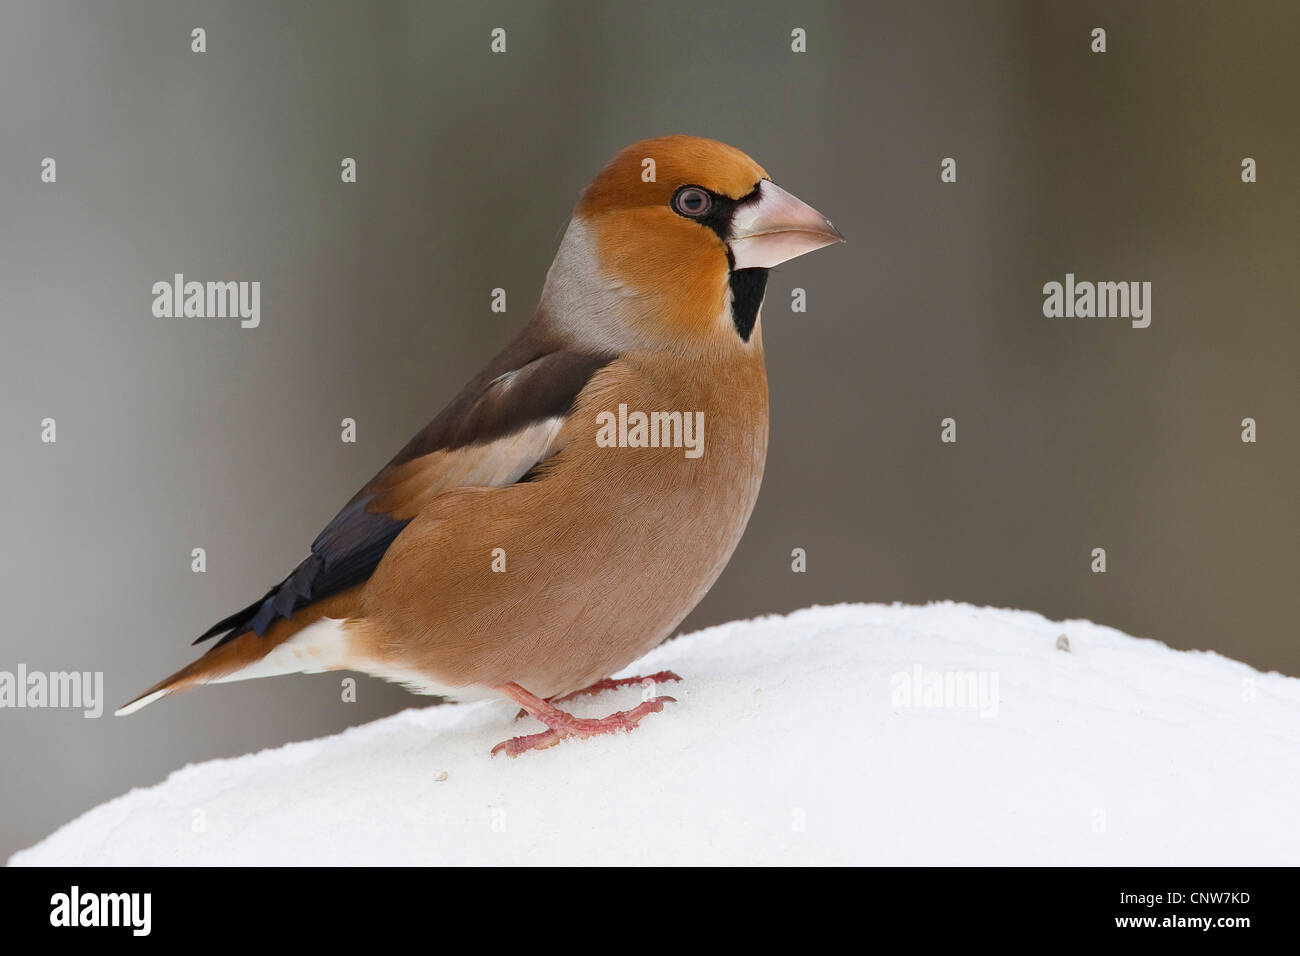 hawfinch (Coccothraustes coccothraustes), sitting in snow, Germany Stock Photo